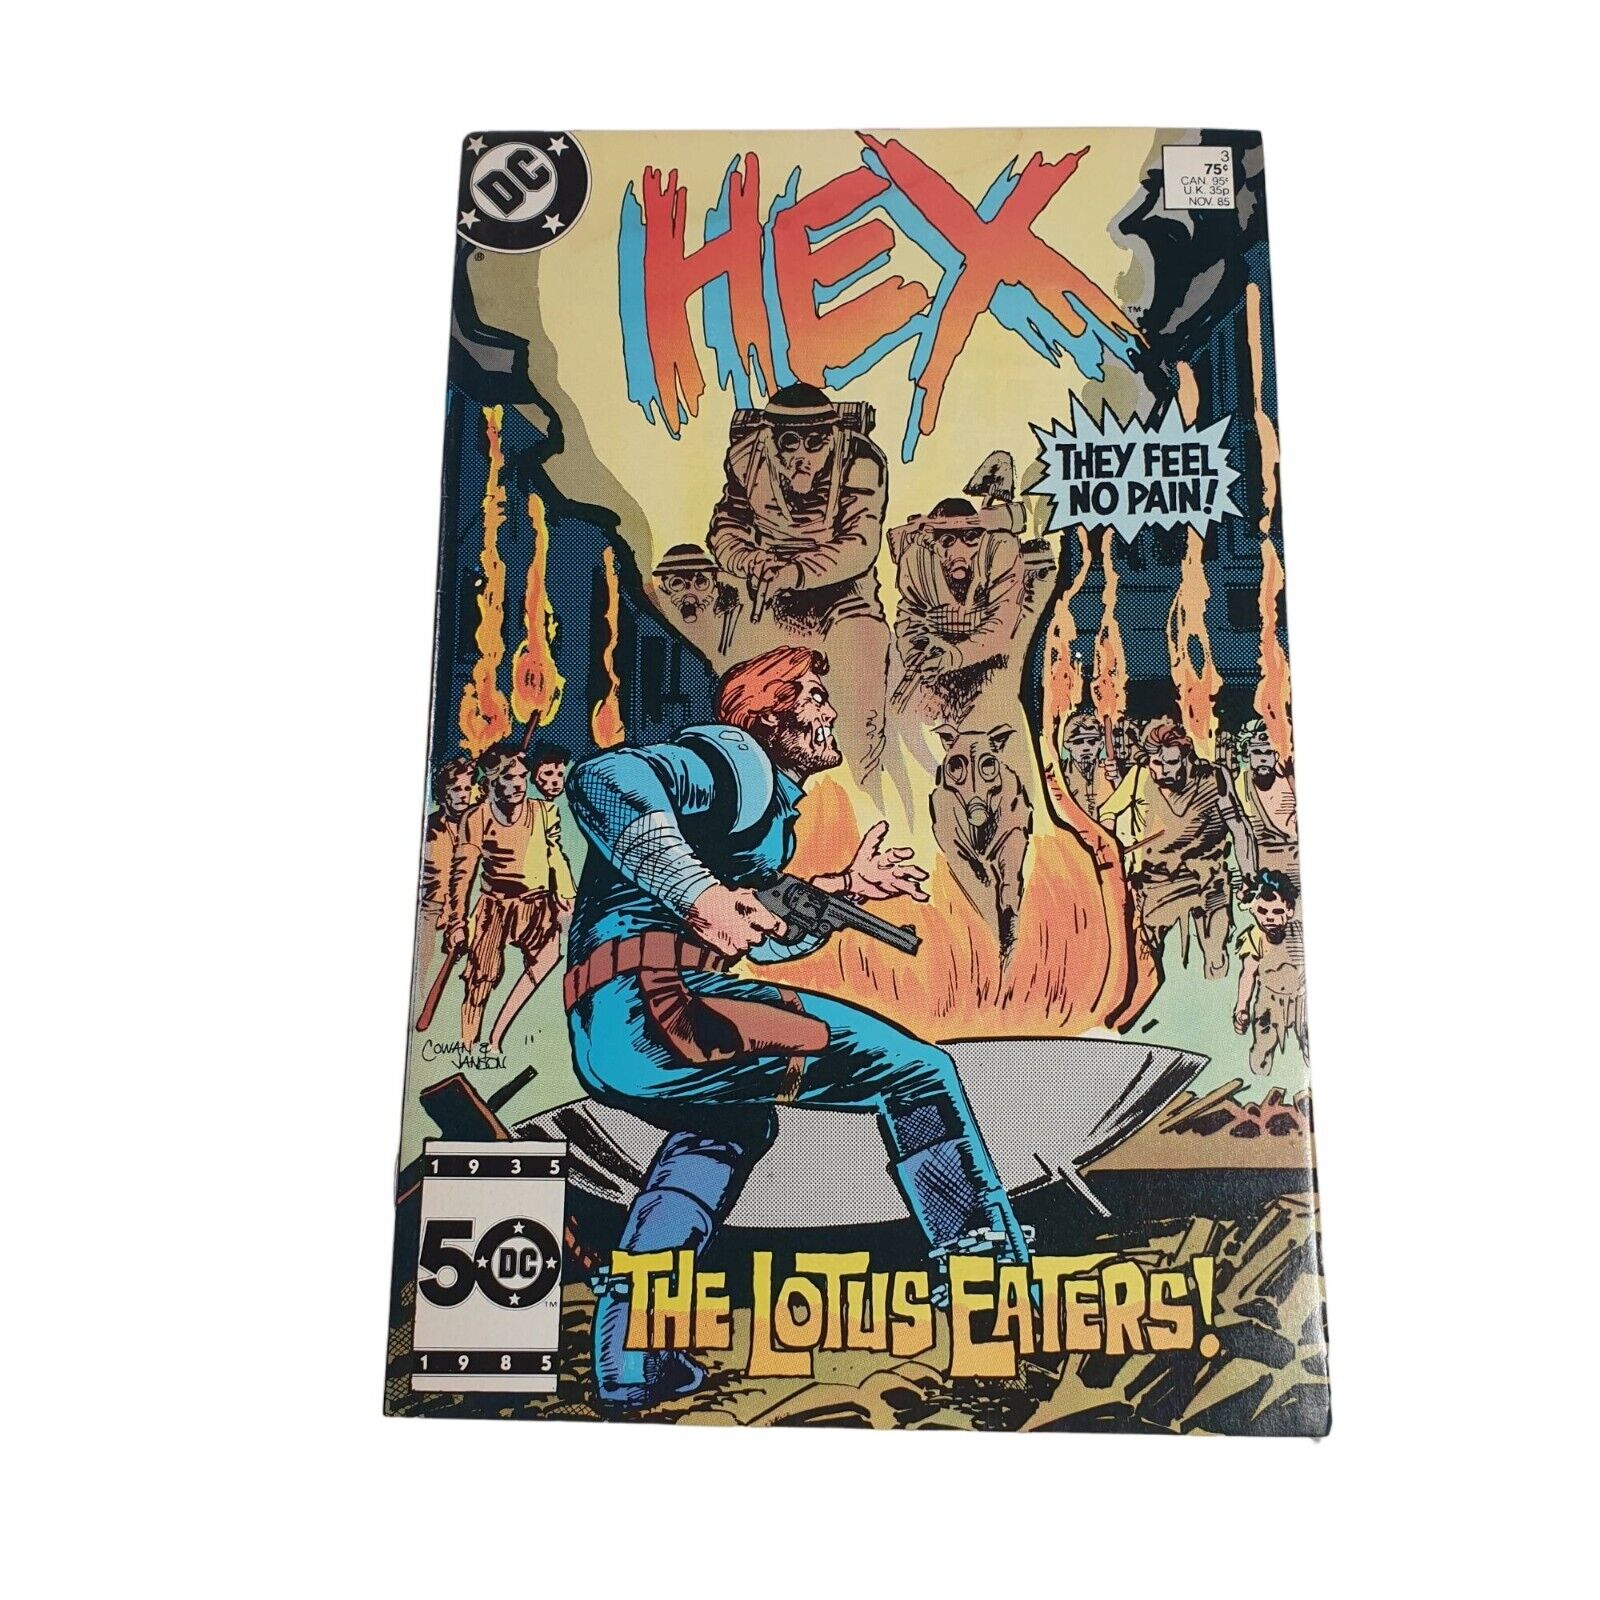 Hex 3 DC Comic Book Nov 1985 Collector Bagged Boarded Direct Editions